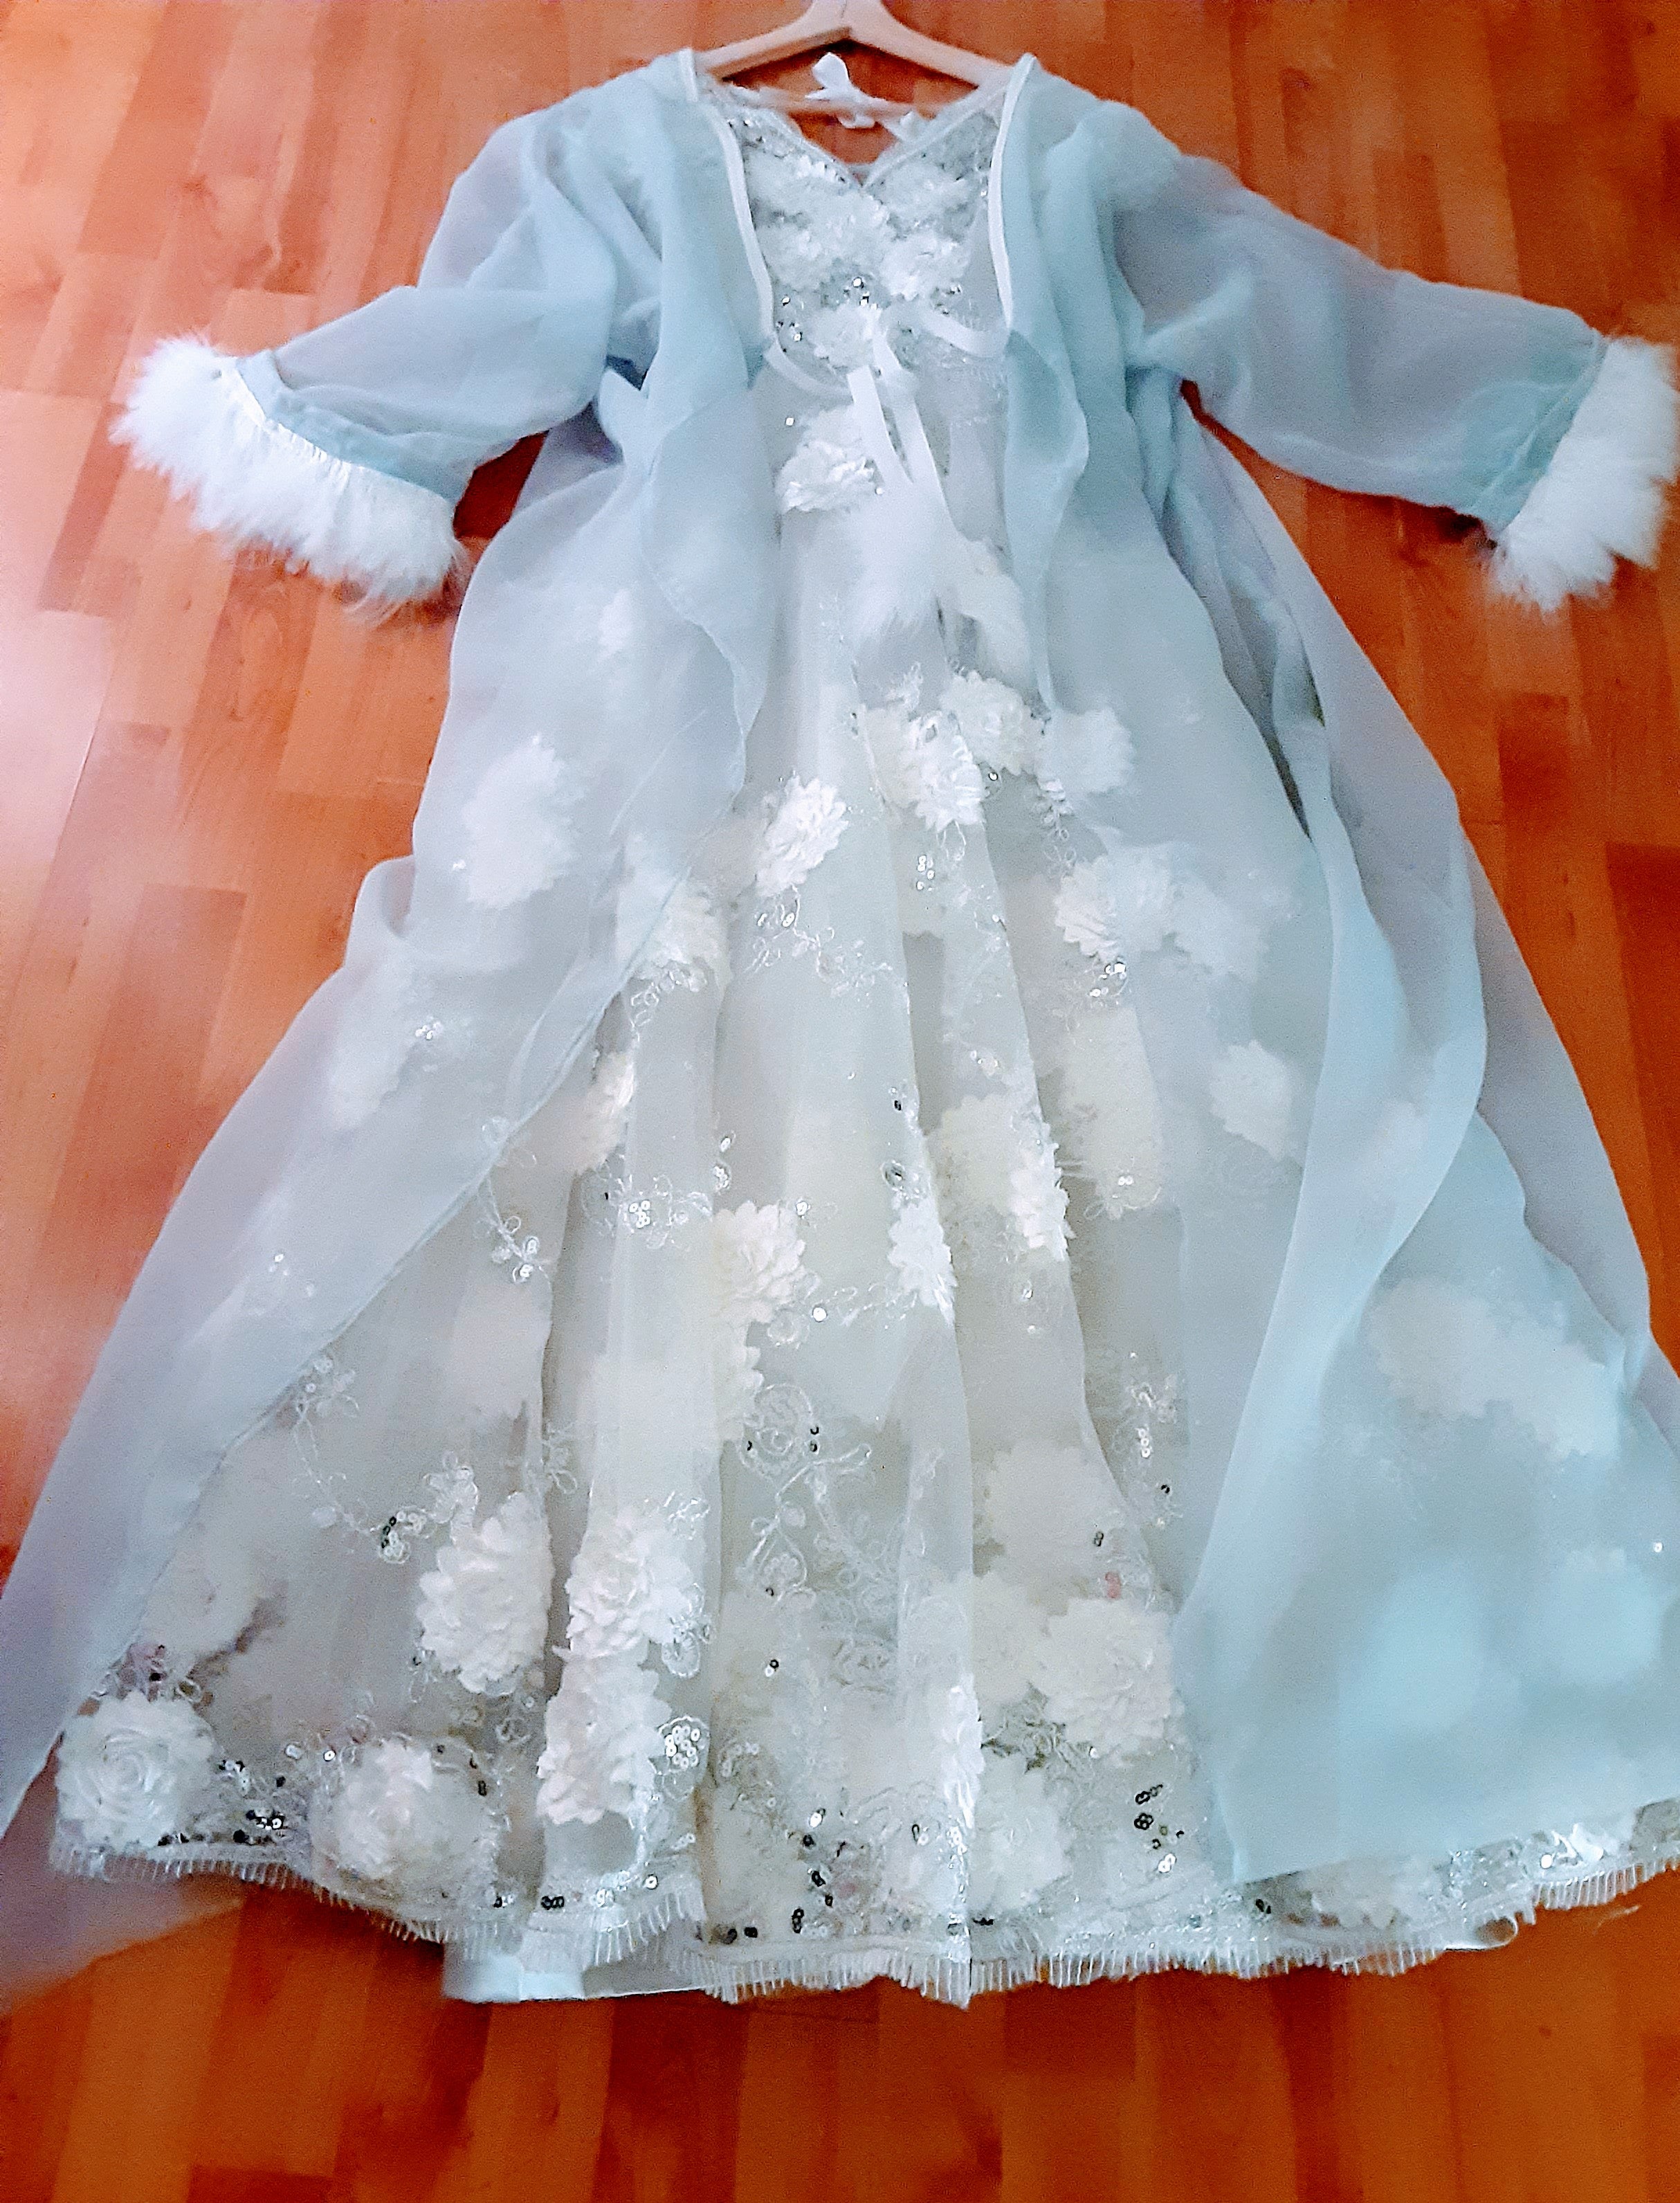 Flower embroderied Weddingdress with Tull and Satin underlayers